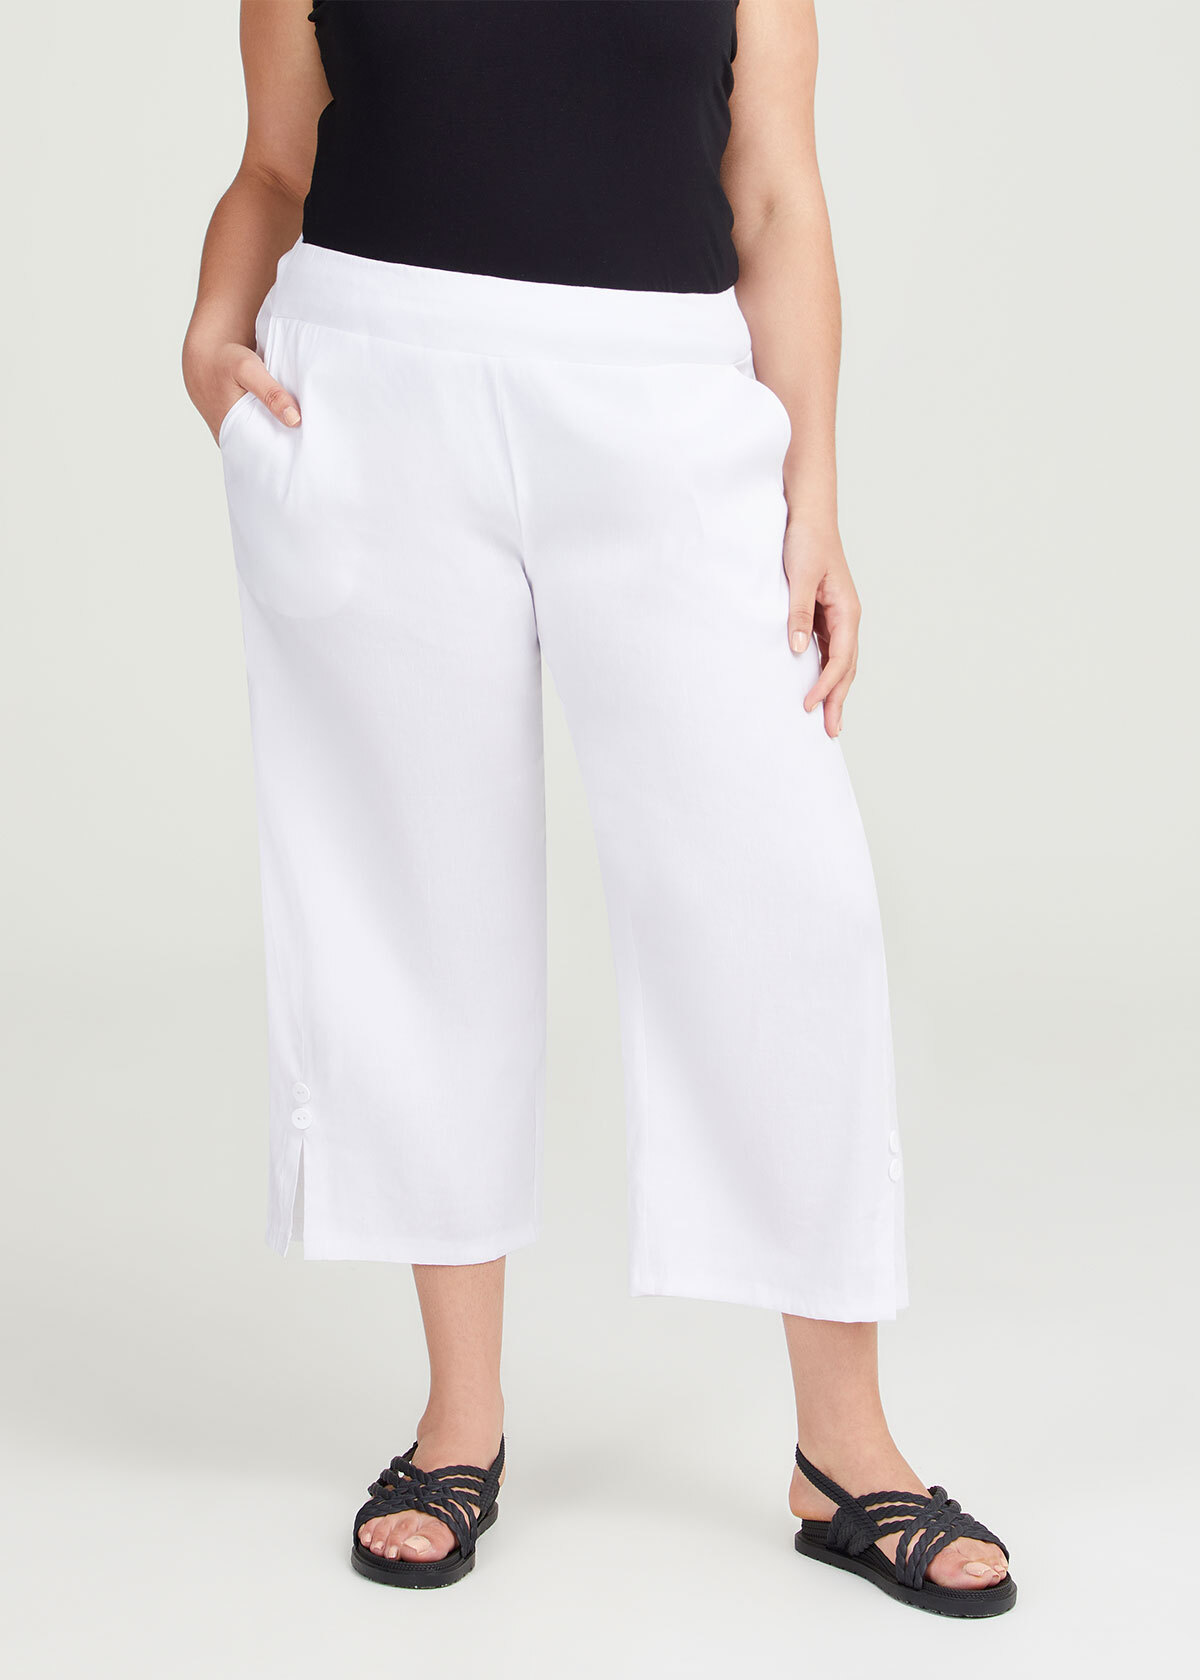 Shop Plus Size Stretch Linen Foundation Crop Pant in White | Taking ...